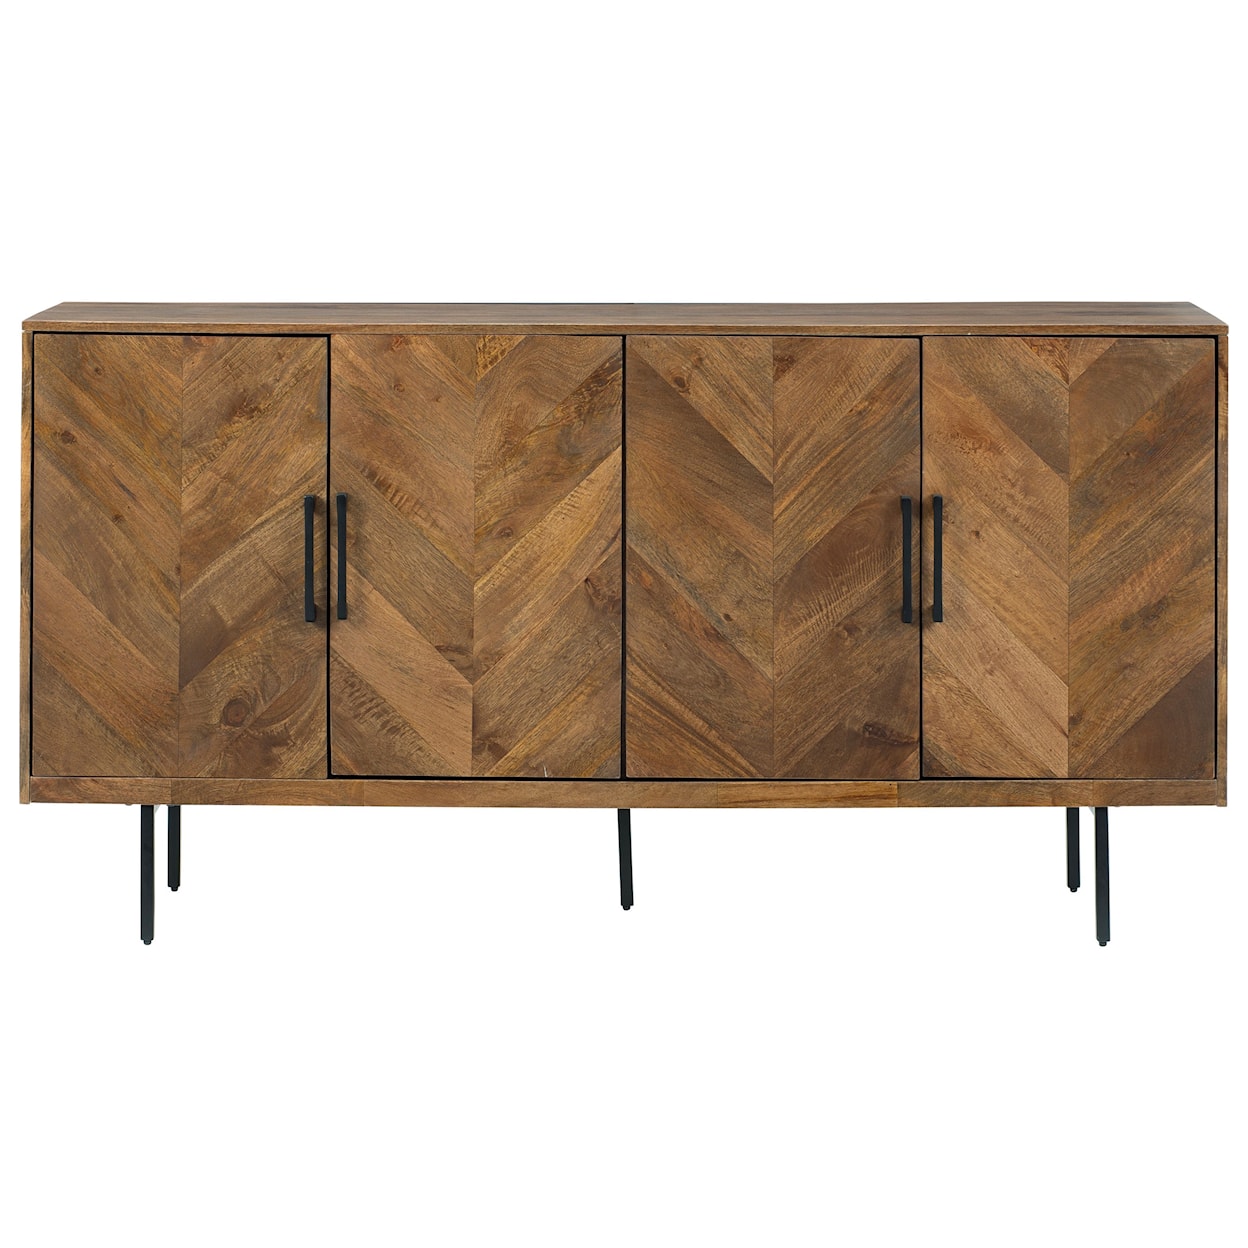 Signature Design by Ashley Buford Accent Cabinet